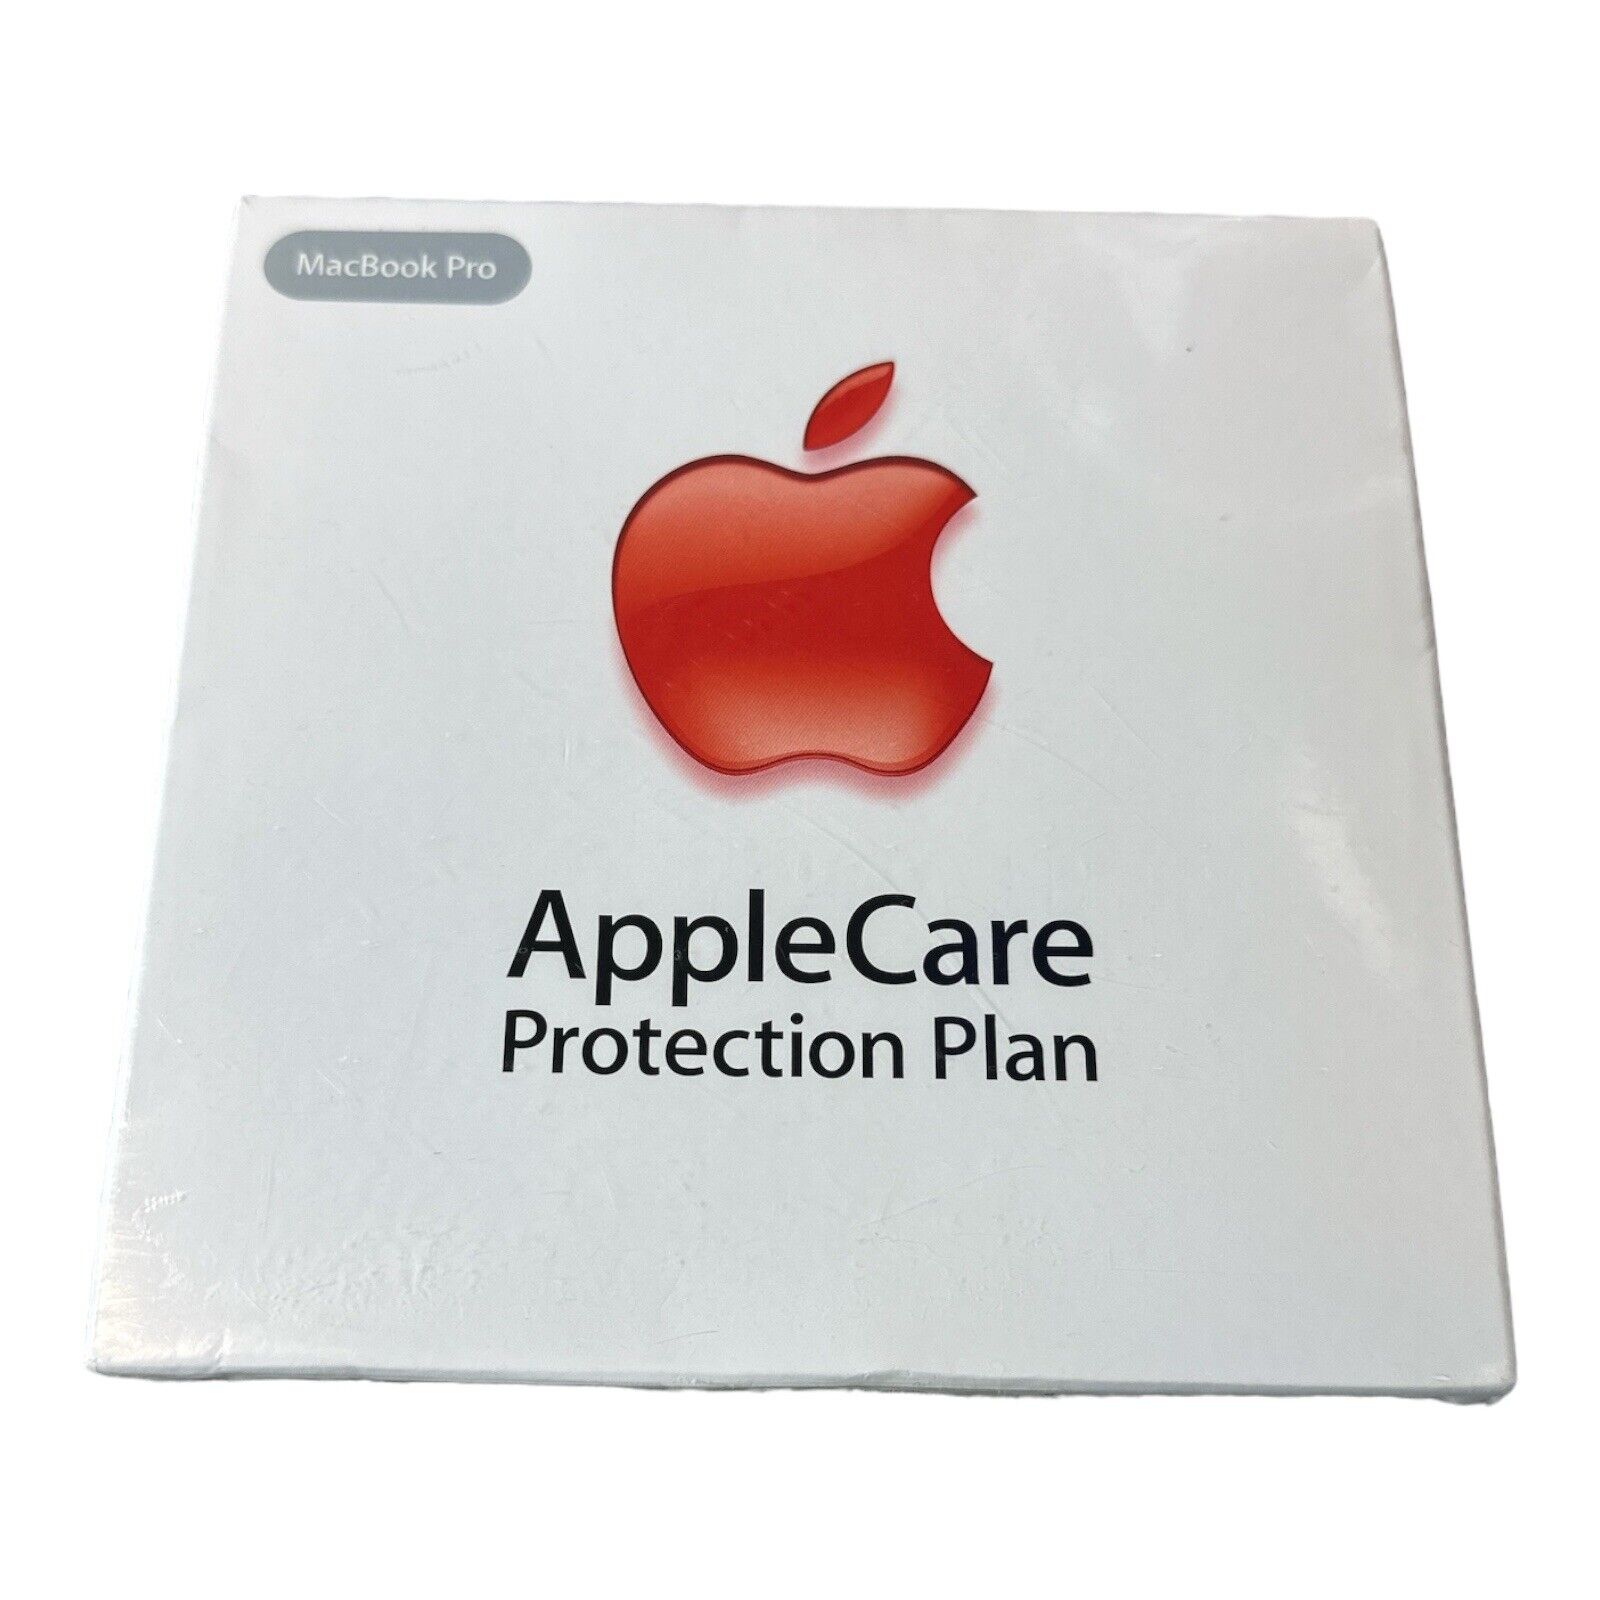 AppleCare Protection Plan For MacBook Pro Sealed